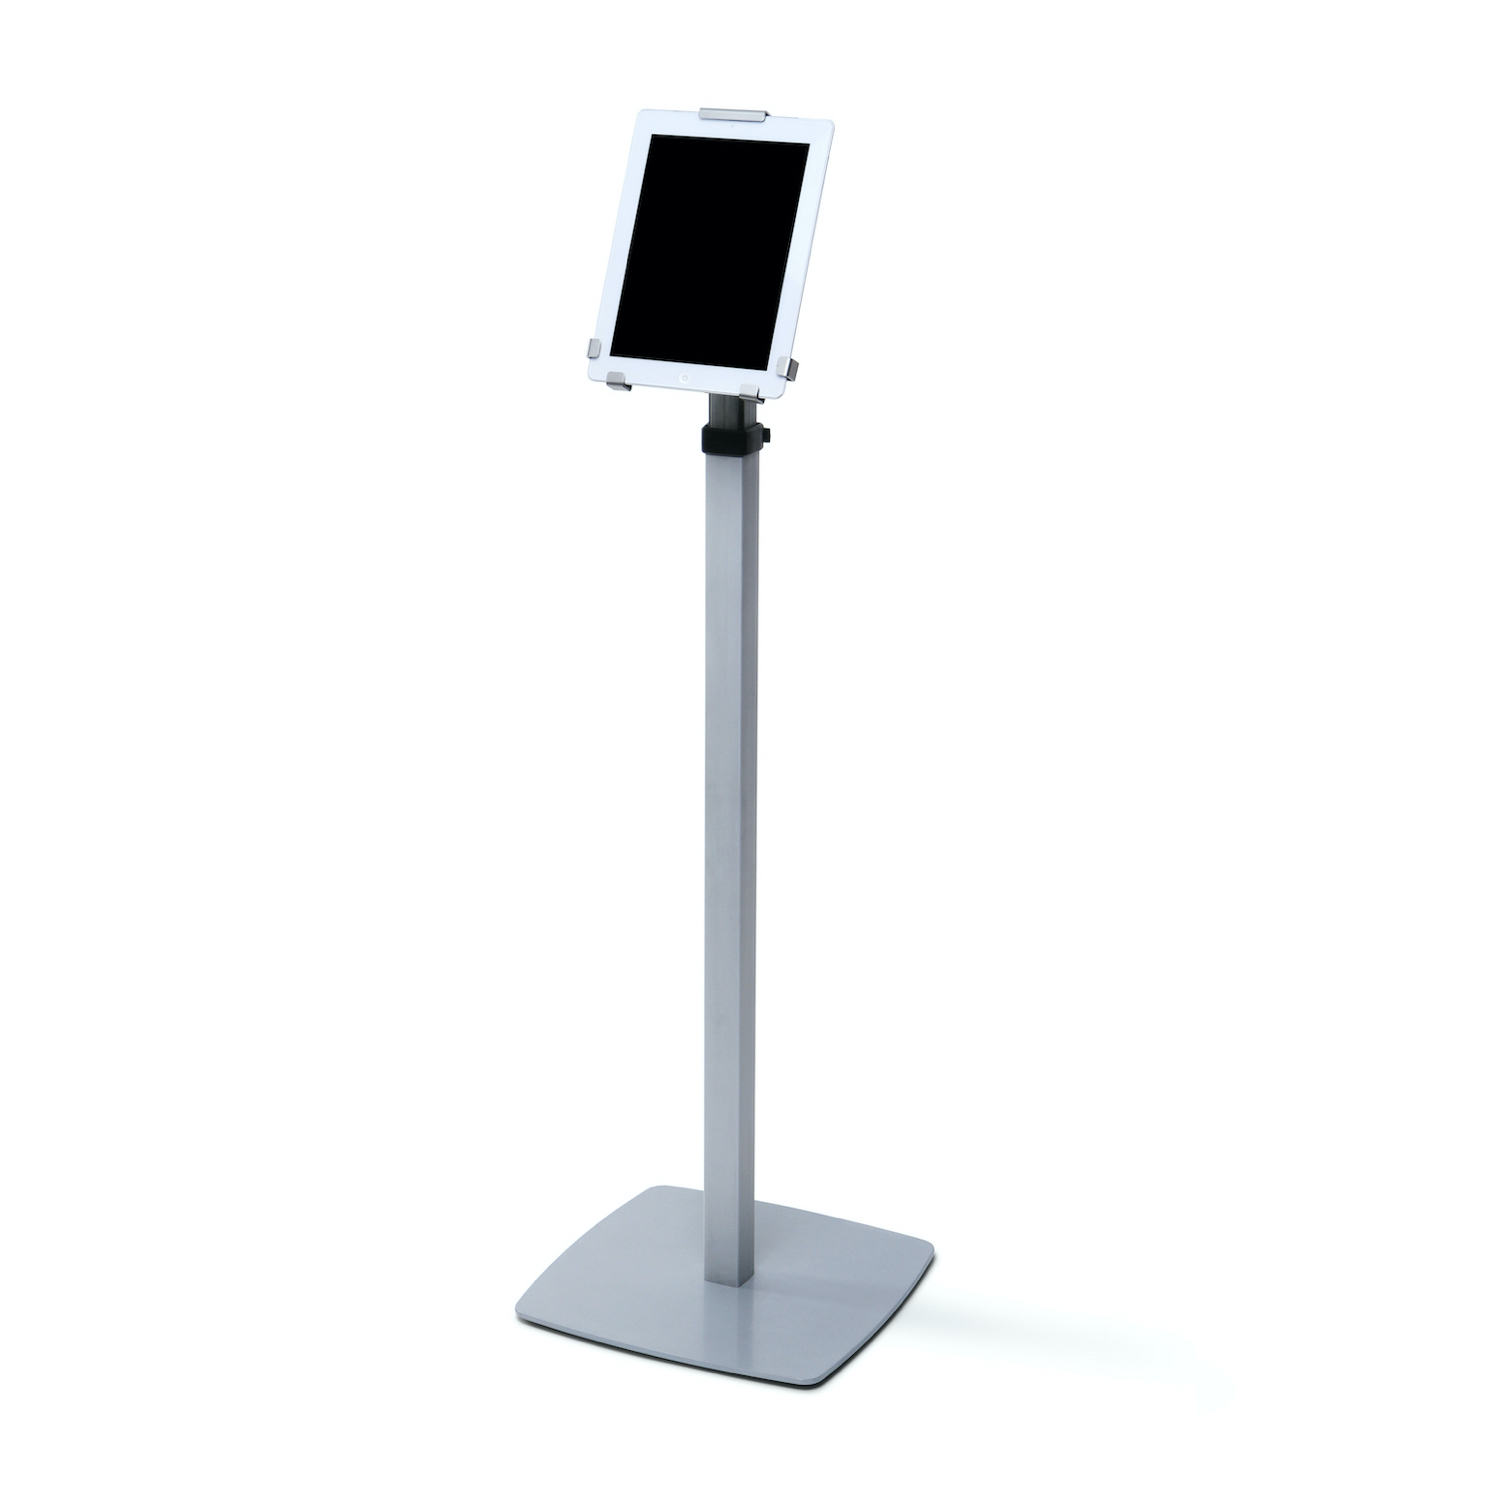 iPad stand with height adjustable pole. Floor stand.